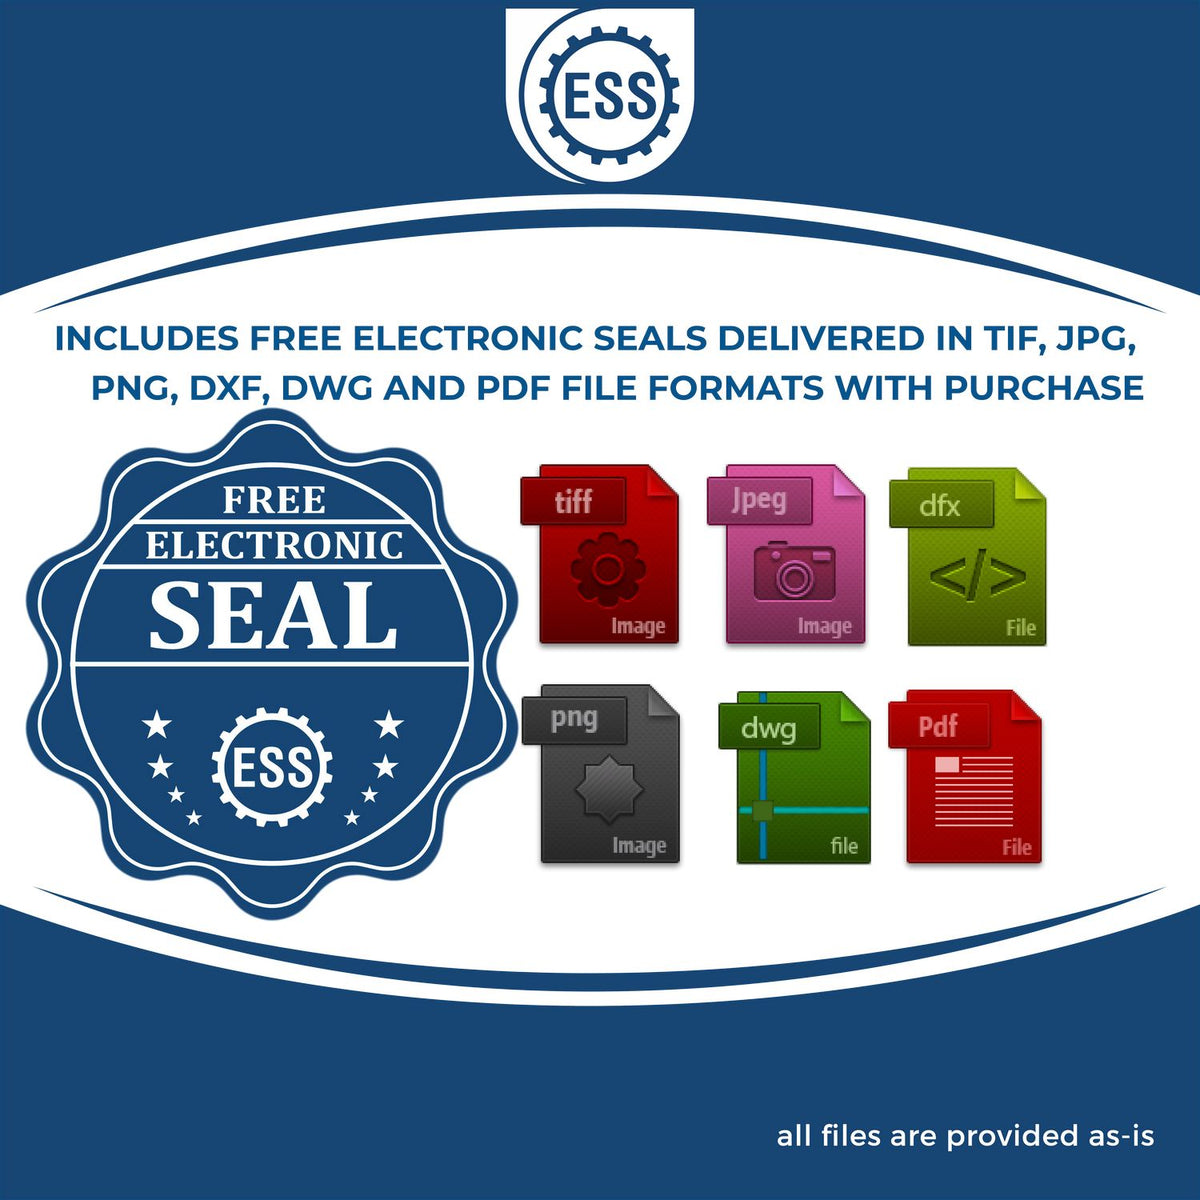 An infographic for the free electronic seal for the Soft Arizona Professional Geologist Seal illustrating the different file type icons such as DXF, DWG, TIF, JPG and PNG.